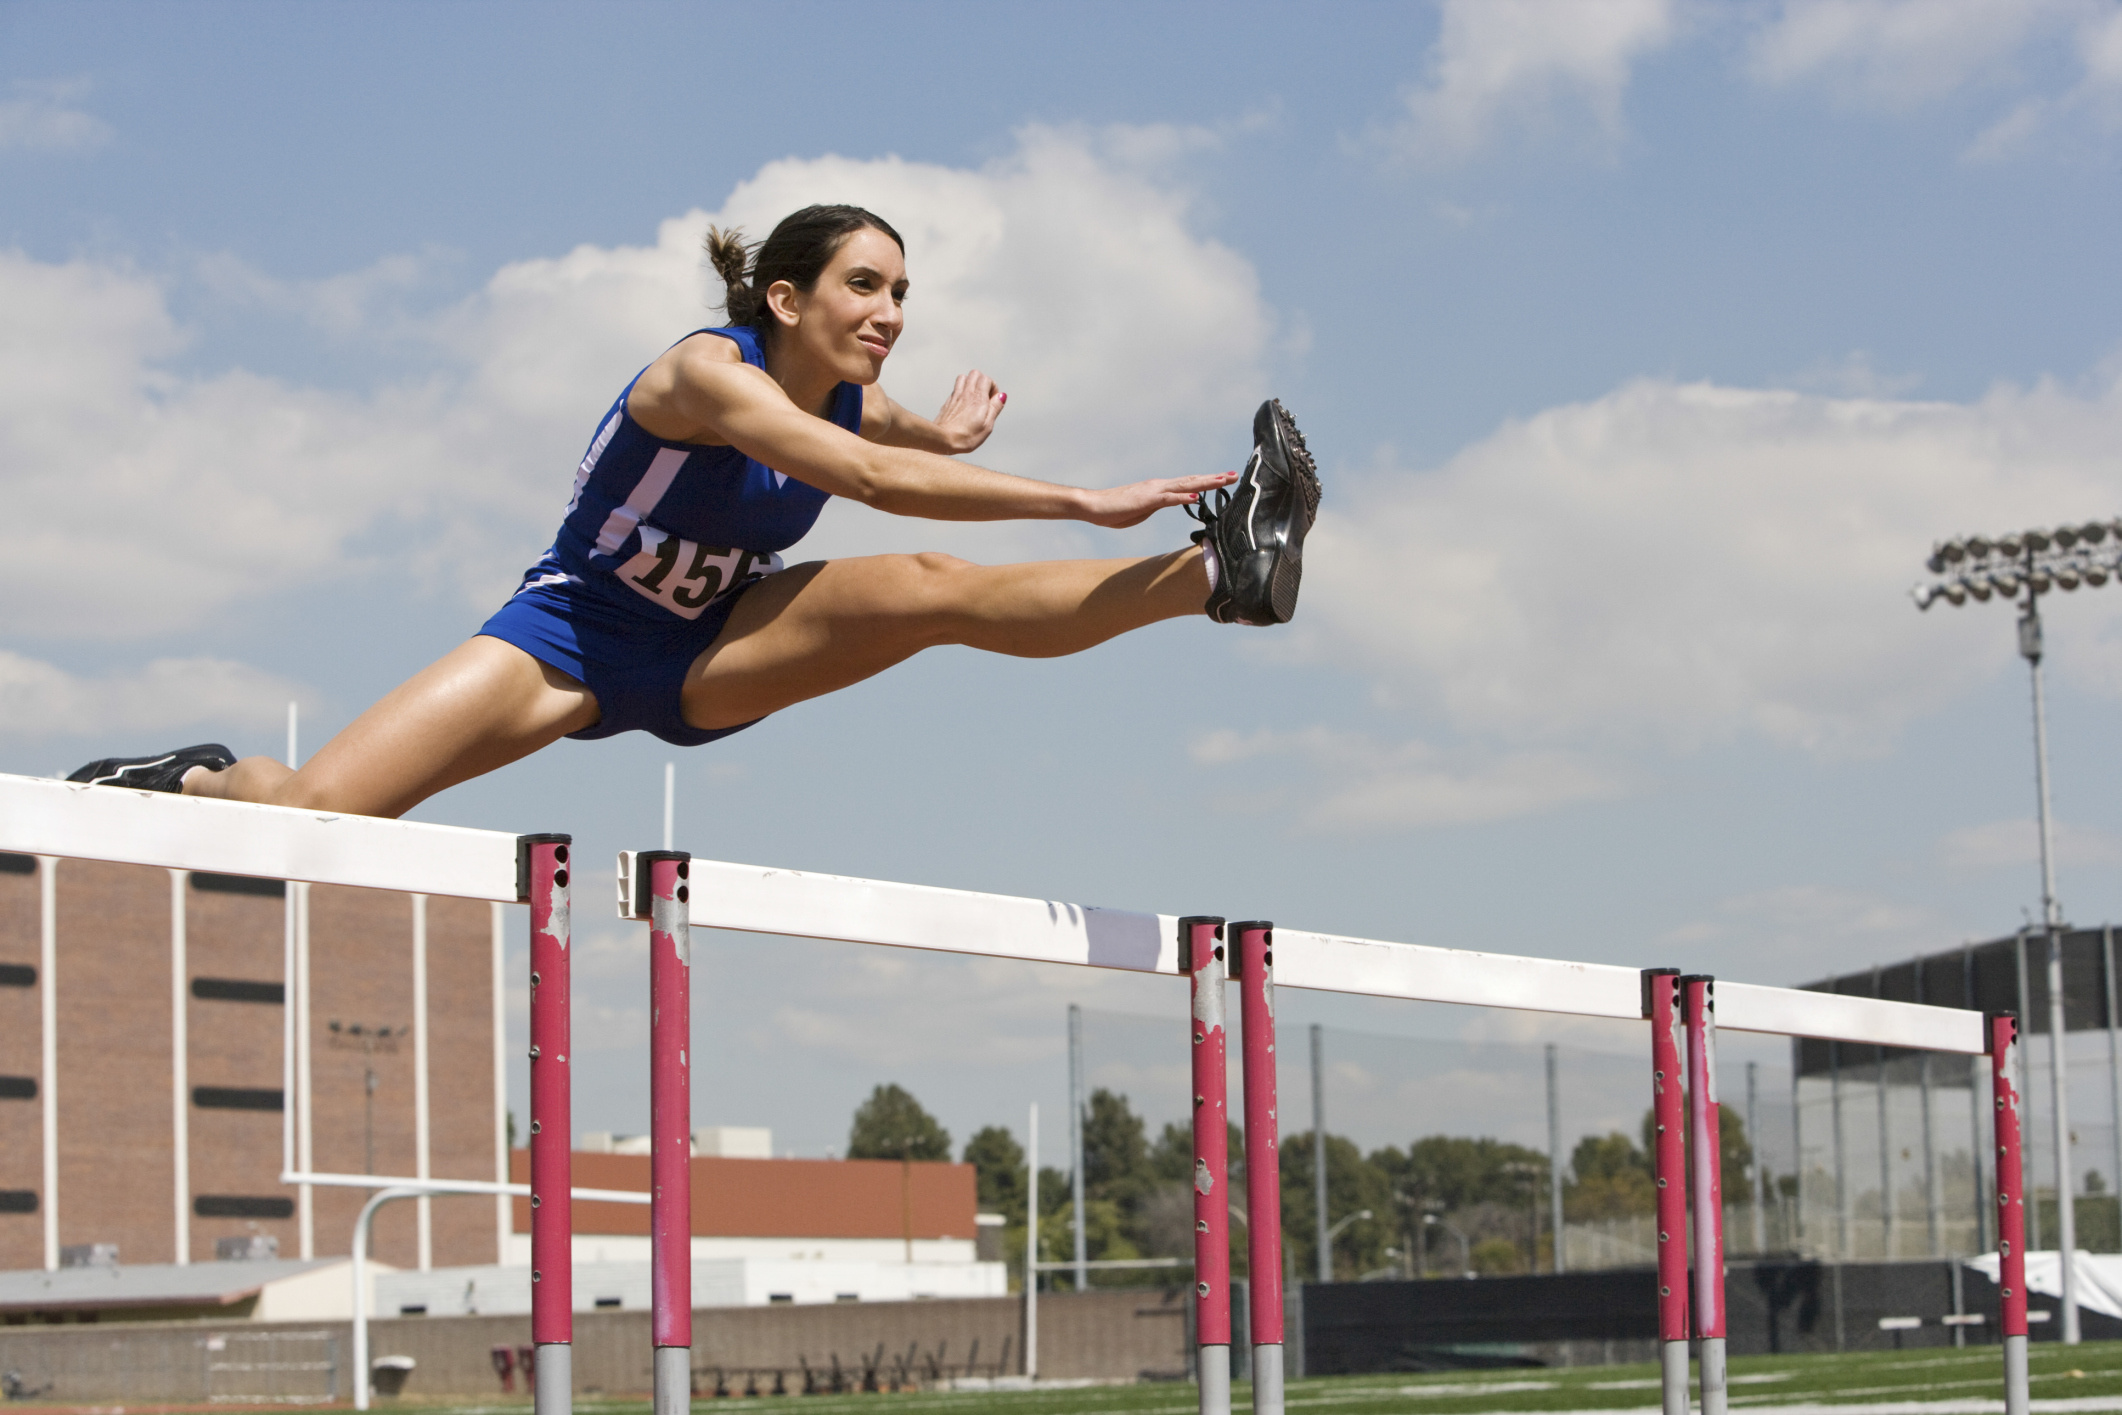 Hurdling: Track Hurdles, The sport of running with obstacles, Track and field athletics. 2130x1420 HD Background.